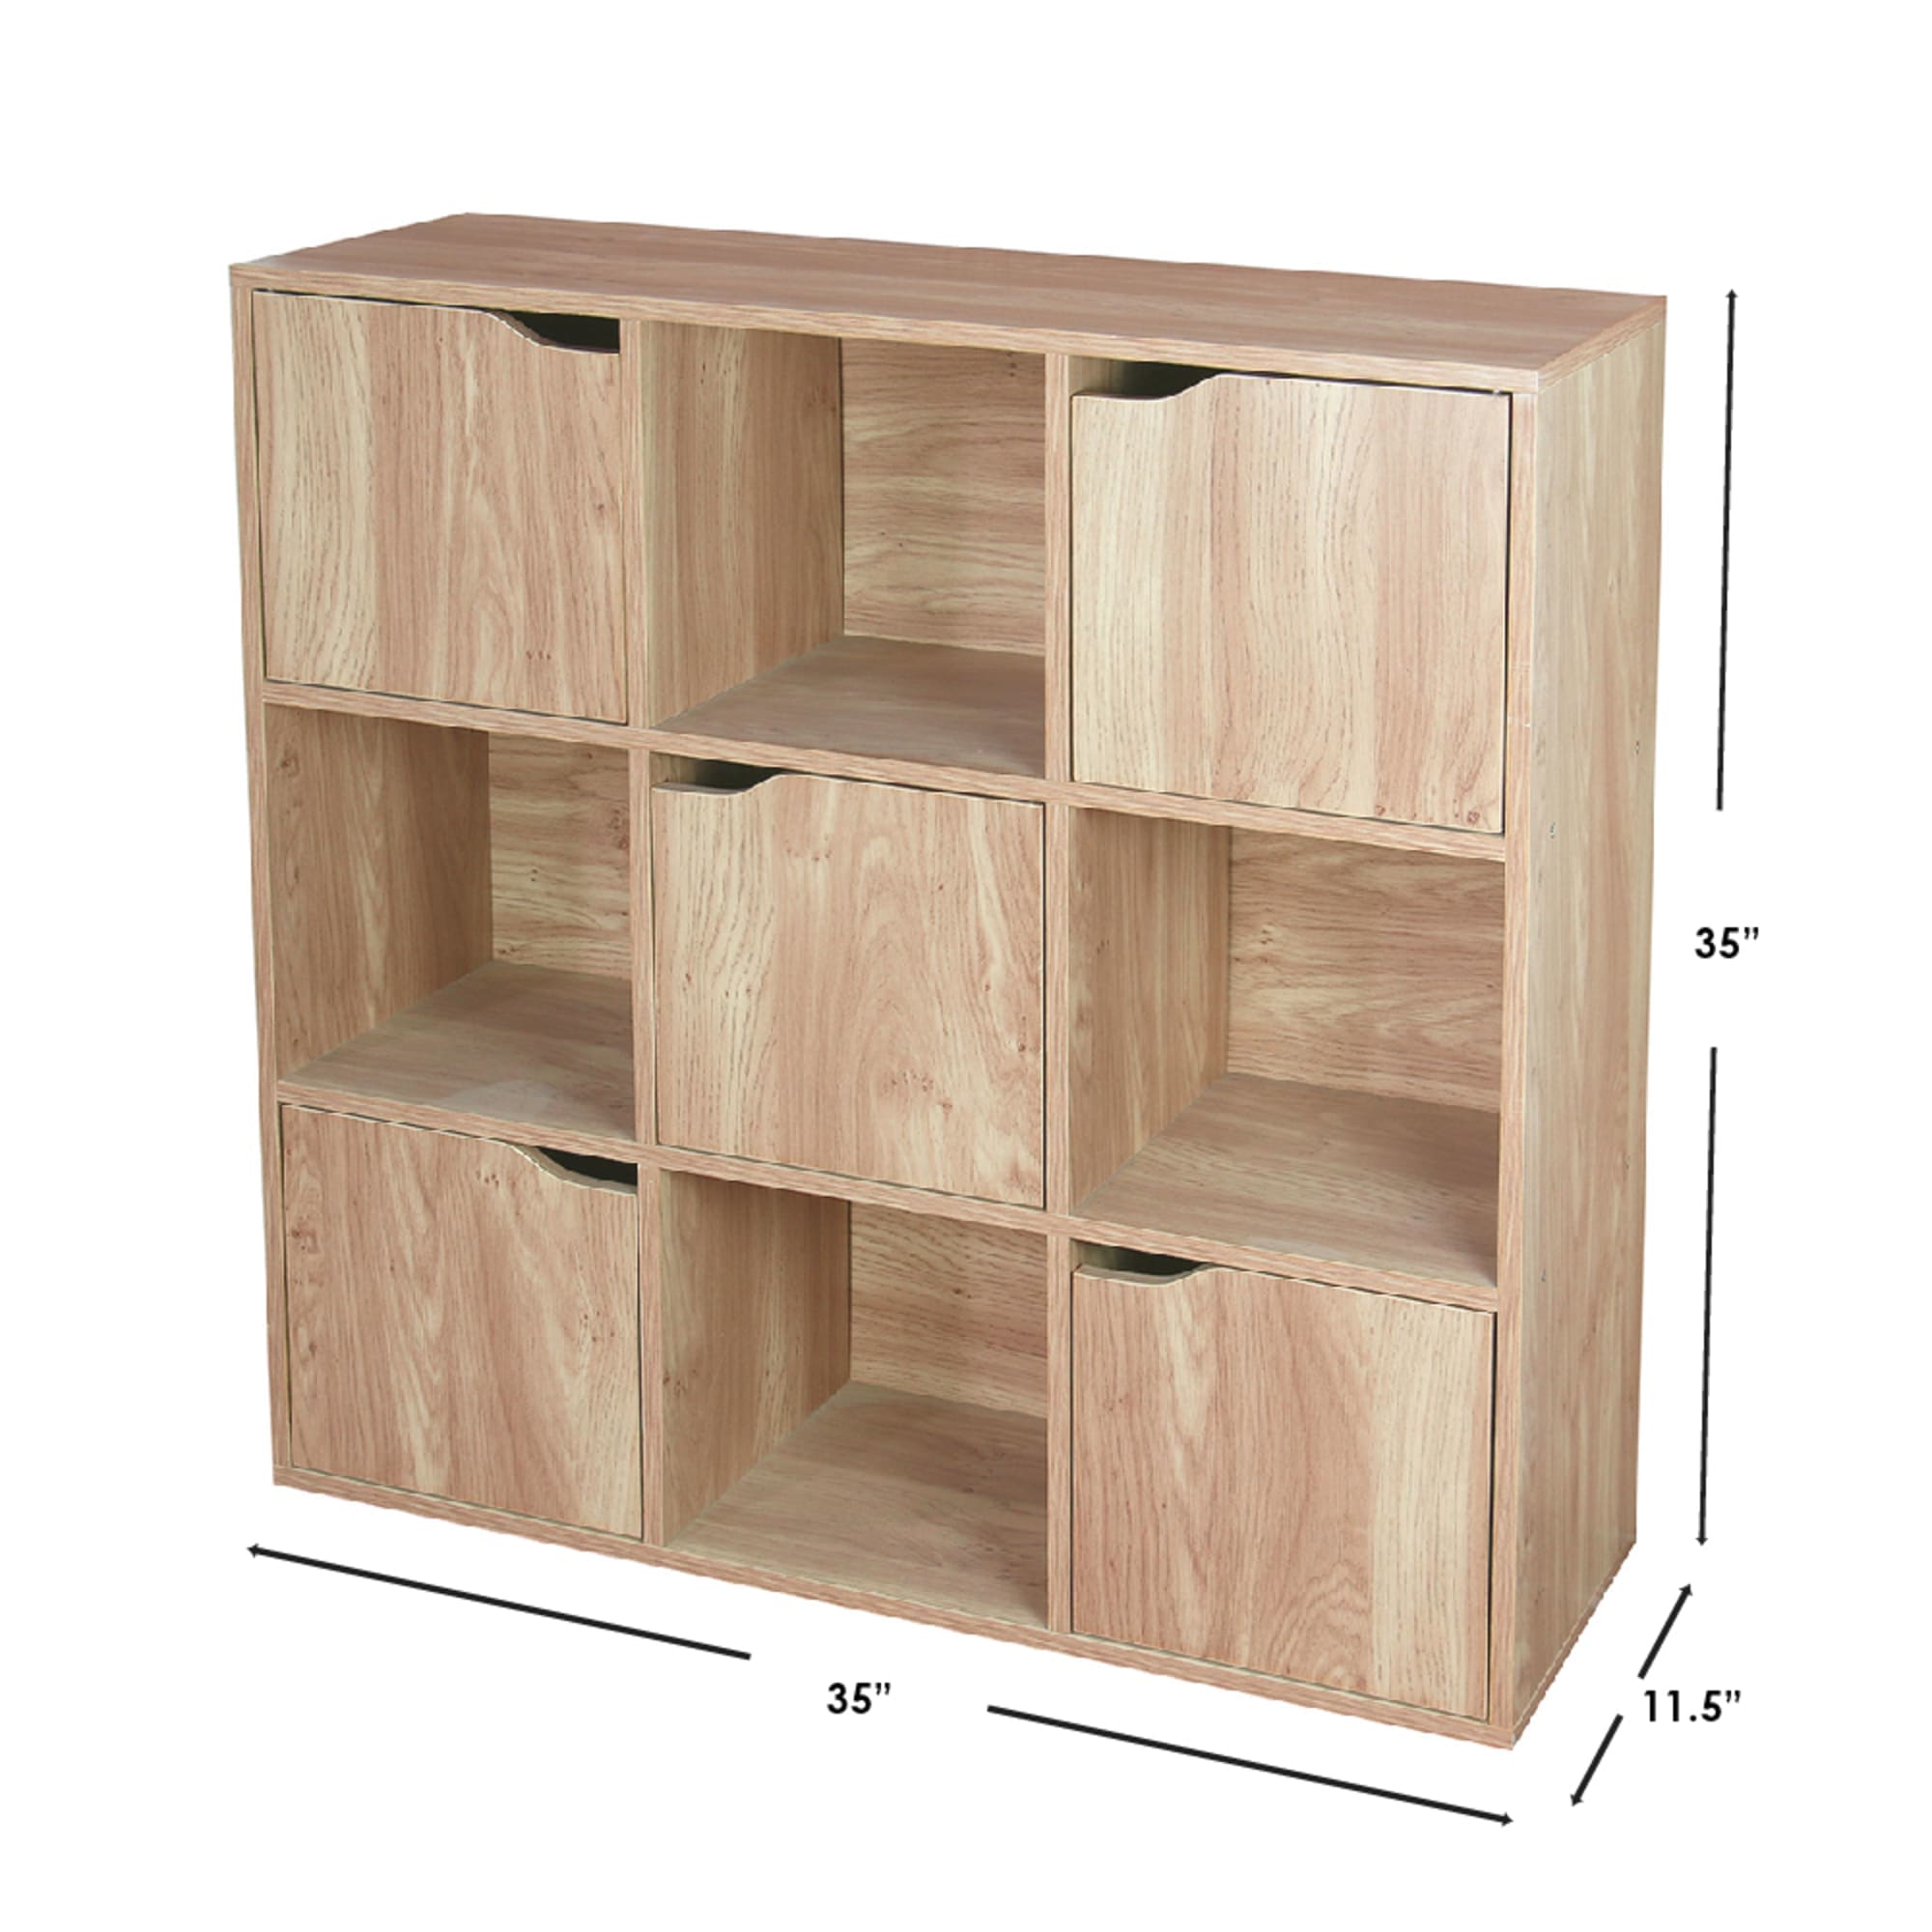 Home Basics 9 Cube MDF Storage Shelf with Doors, Natural $75.00 EACH, CASE PACK OF 1